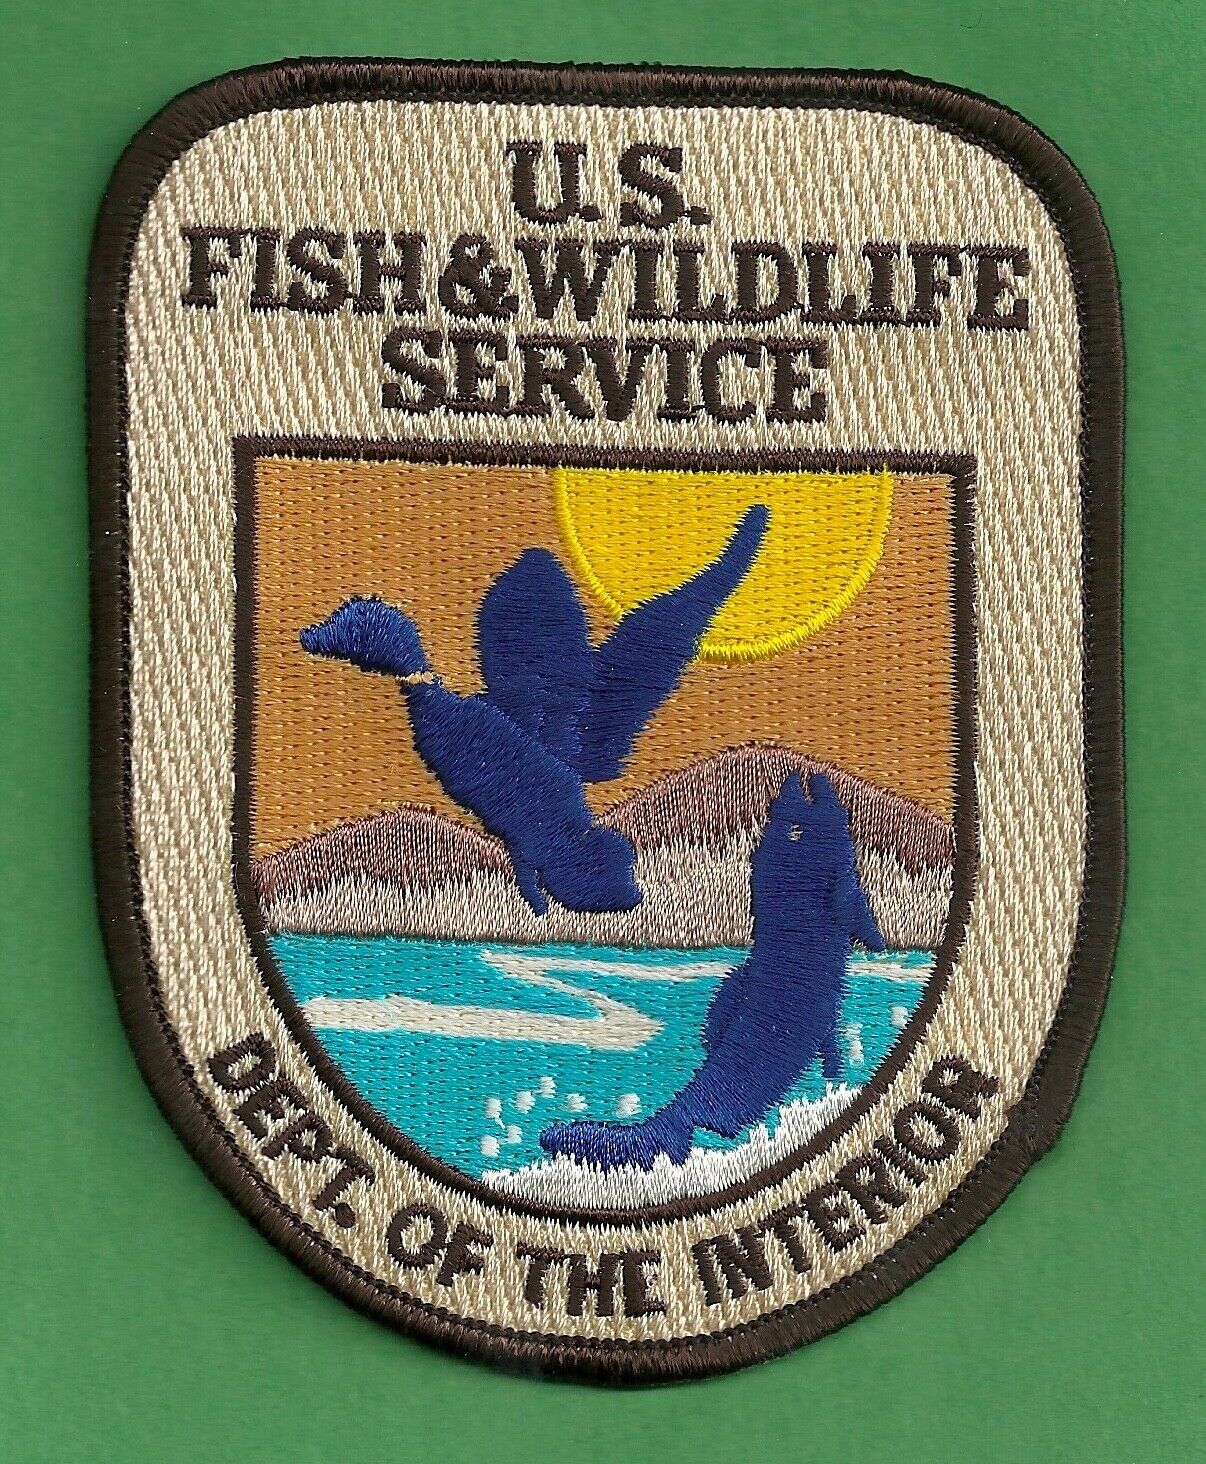 UNITED STATES FISH AND WILDLIFE SERVICE PATCH